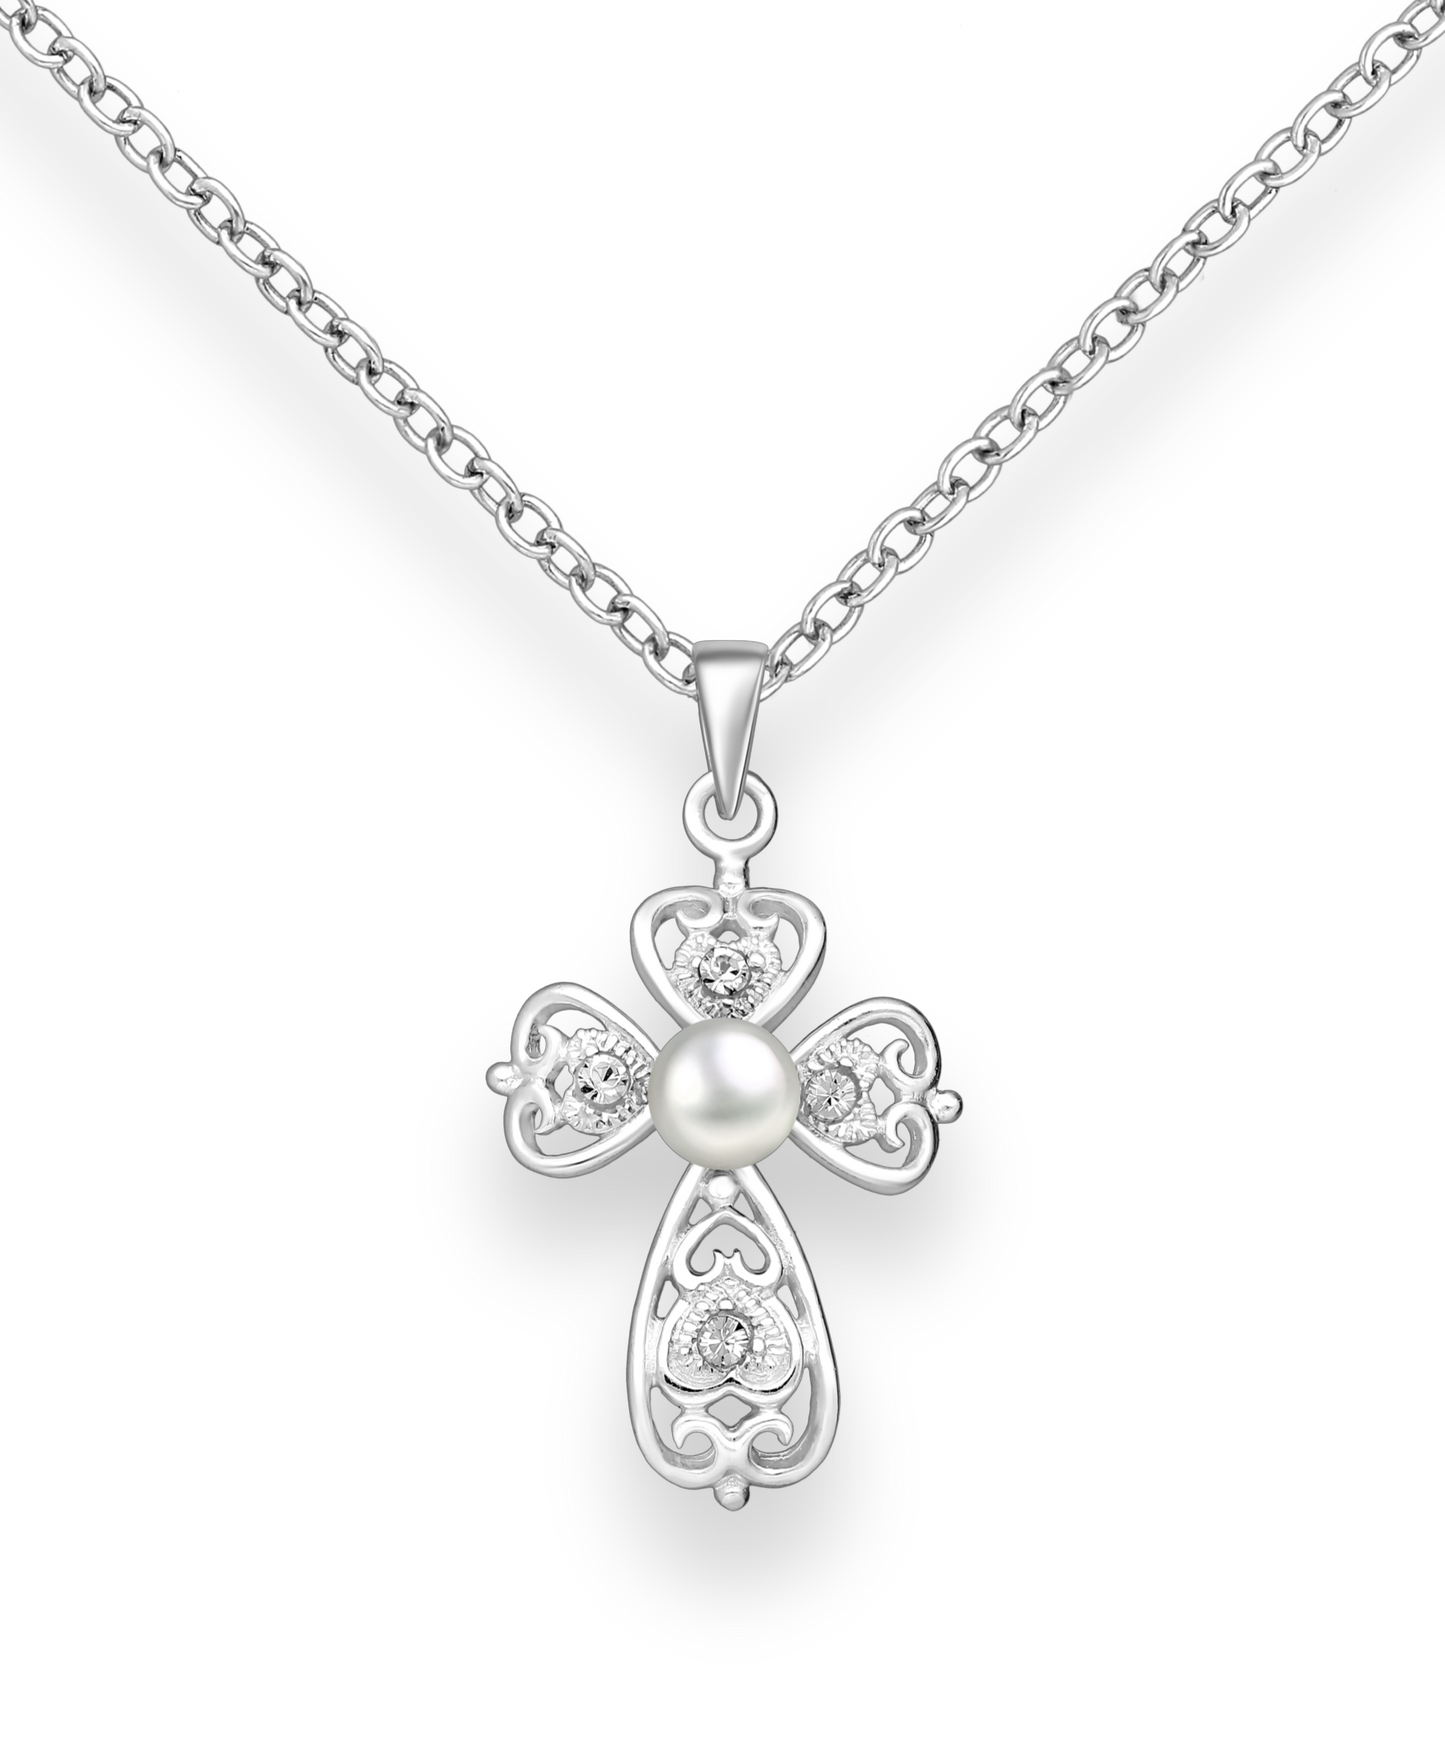 Sterling Silver Swirl Cross Pendant with a White Freshwater Pearl and Crystal